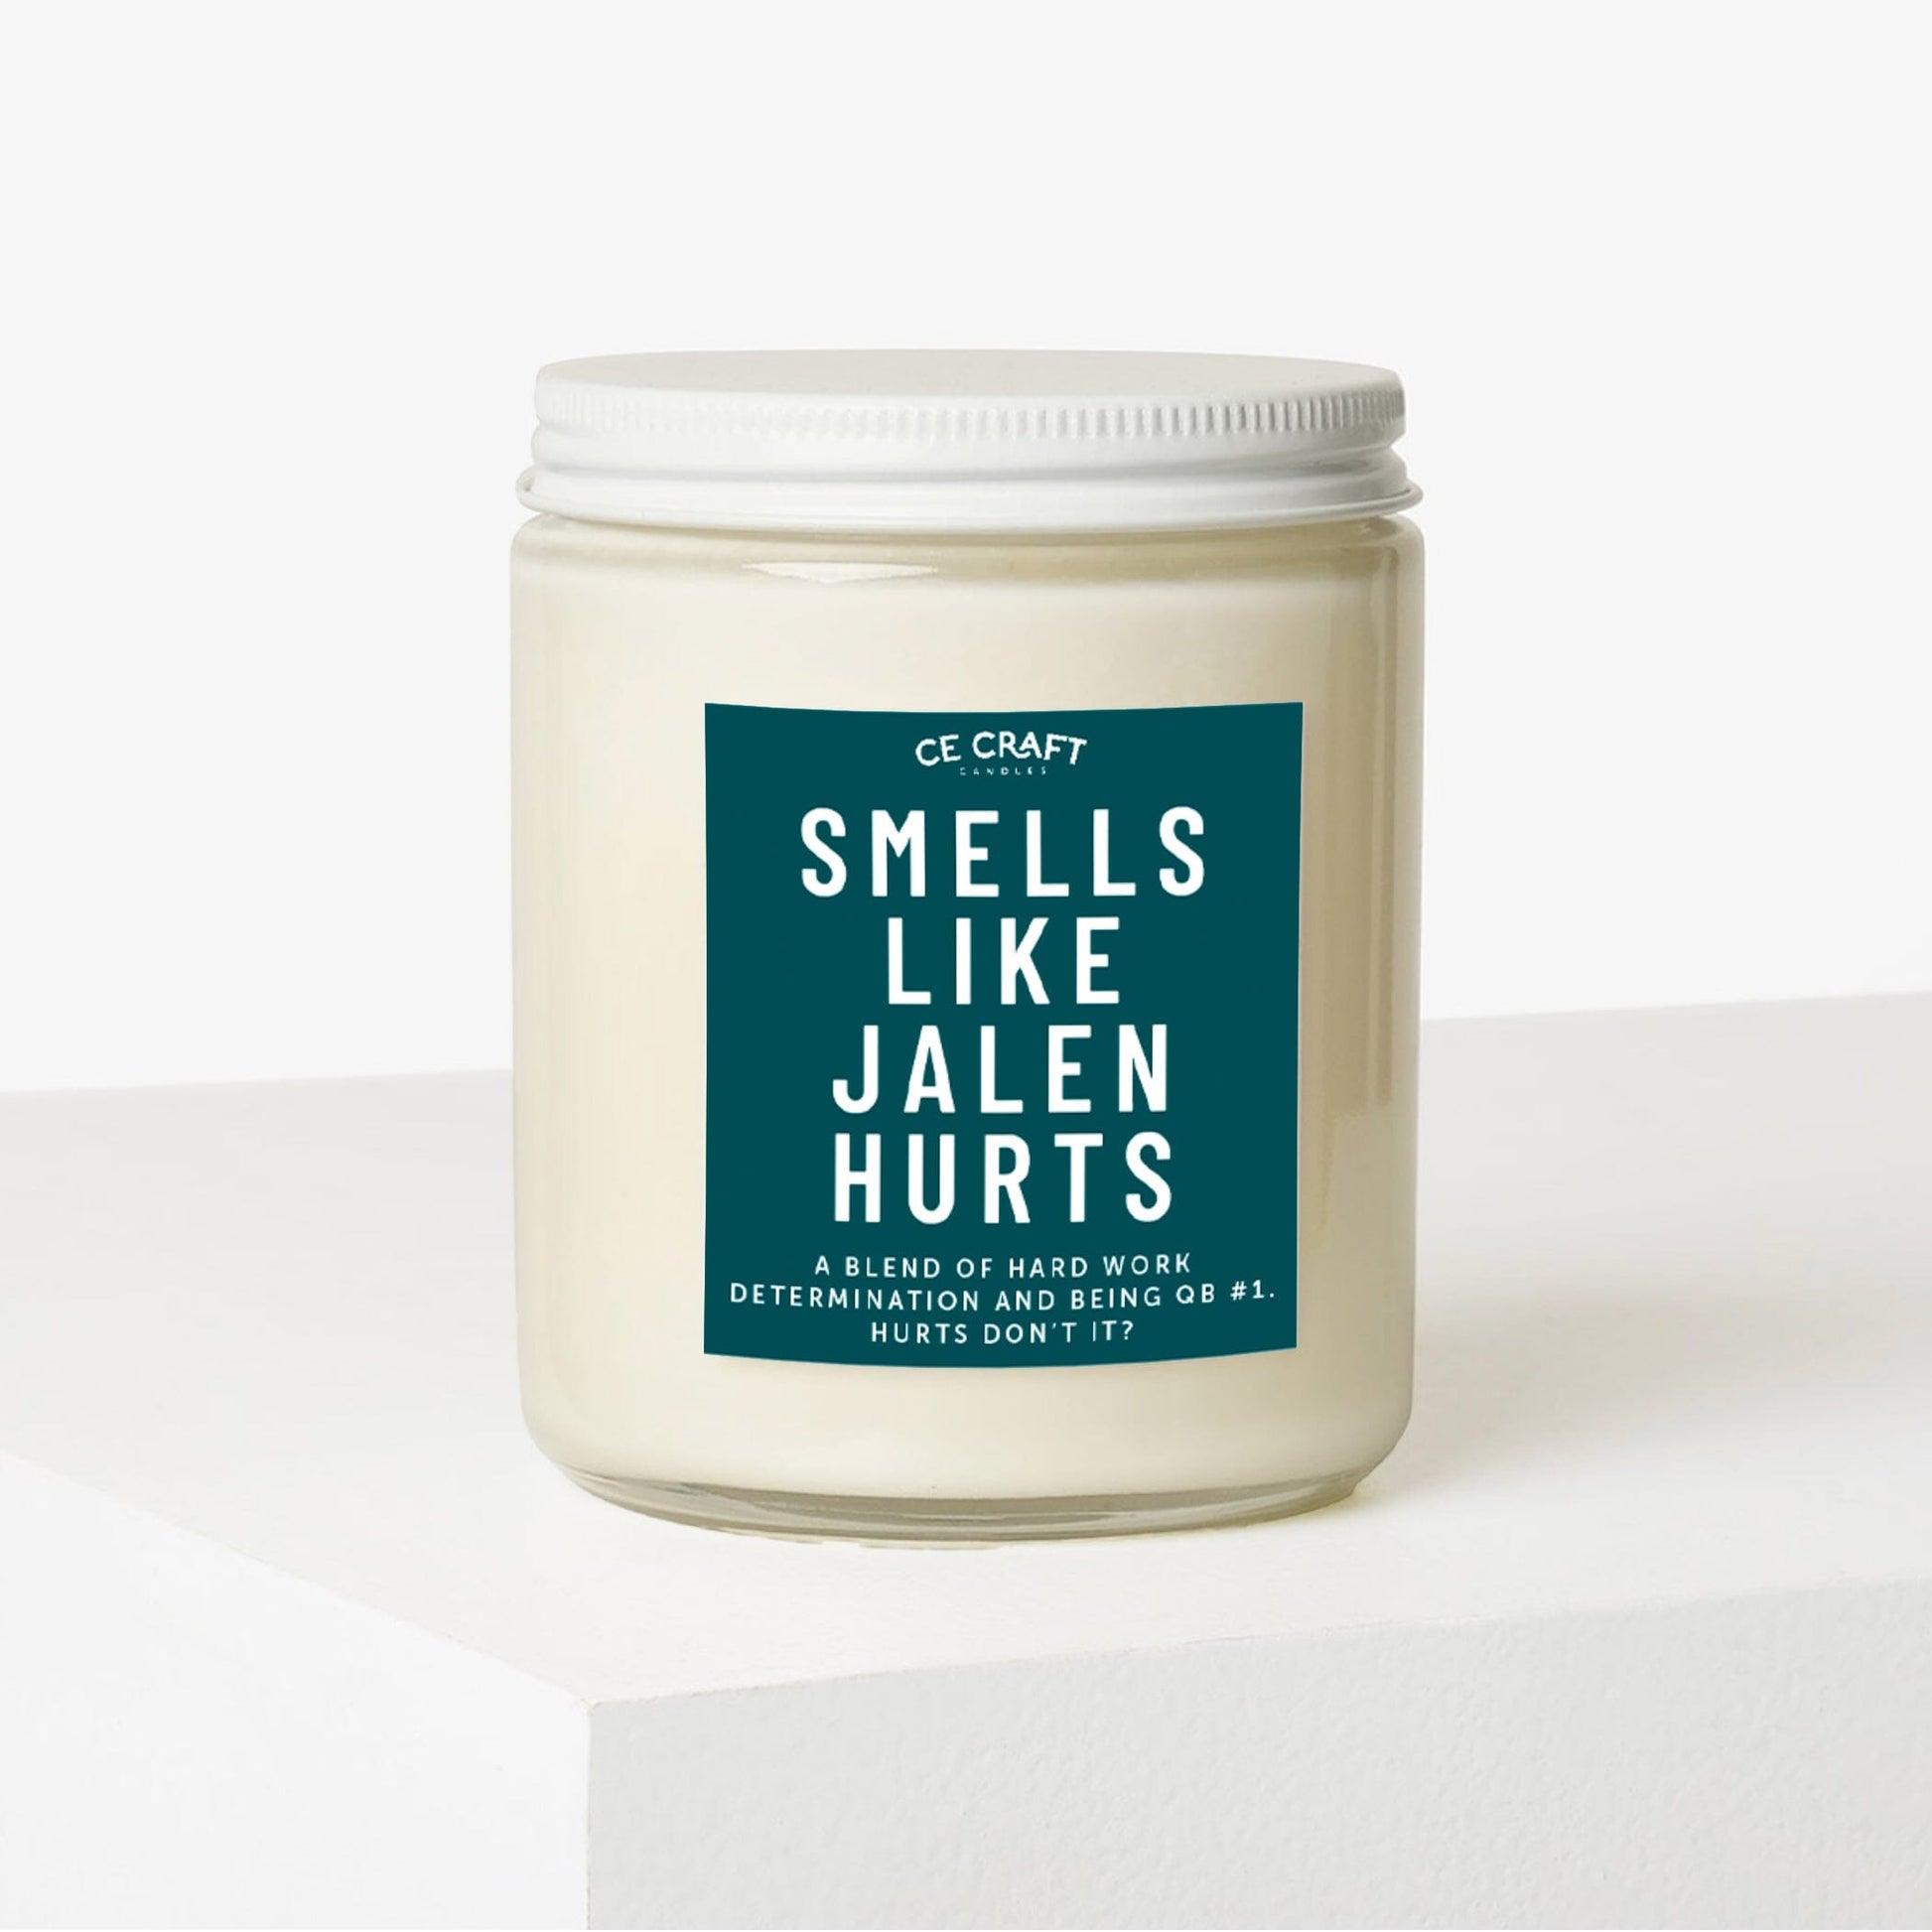 Smells Like Jalen Hurts Candle Candles CE Craft 